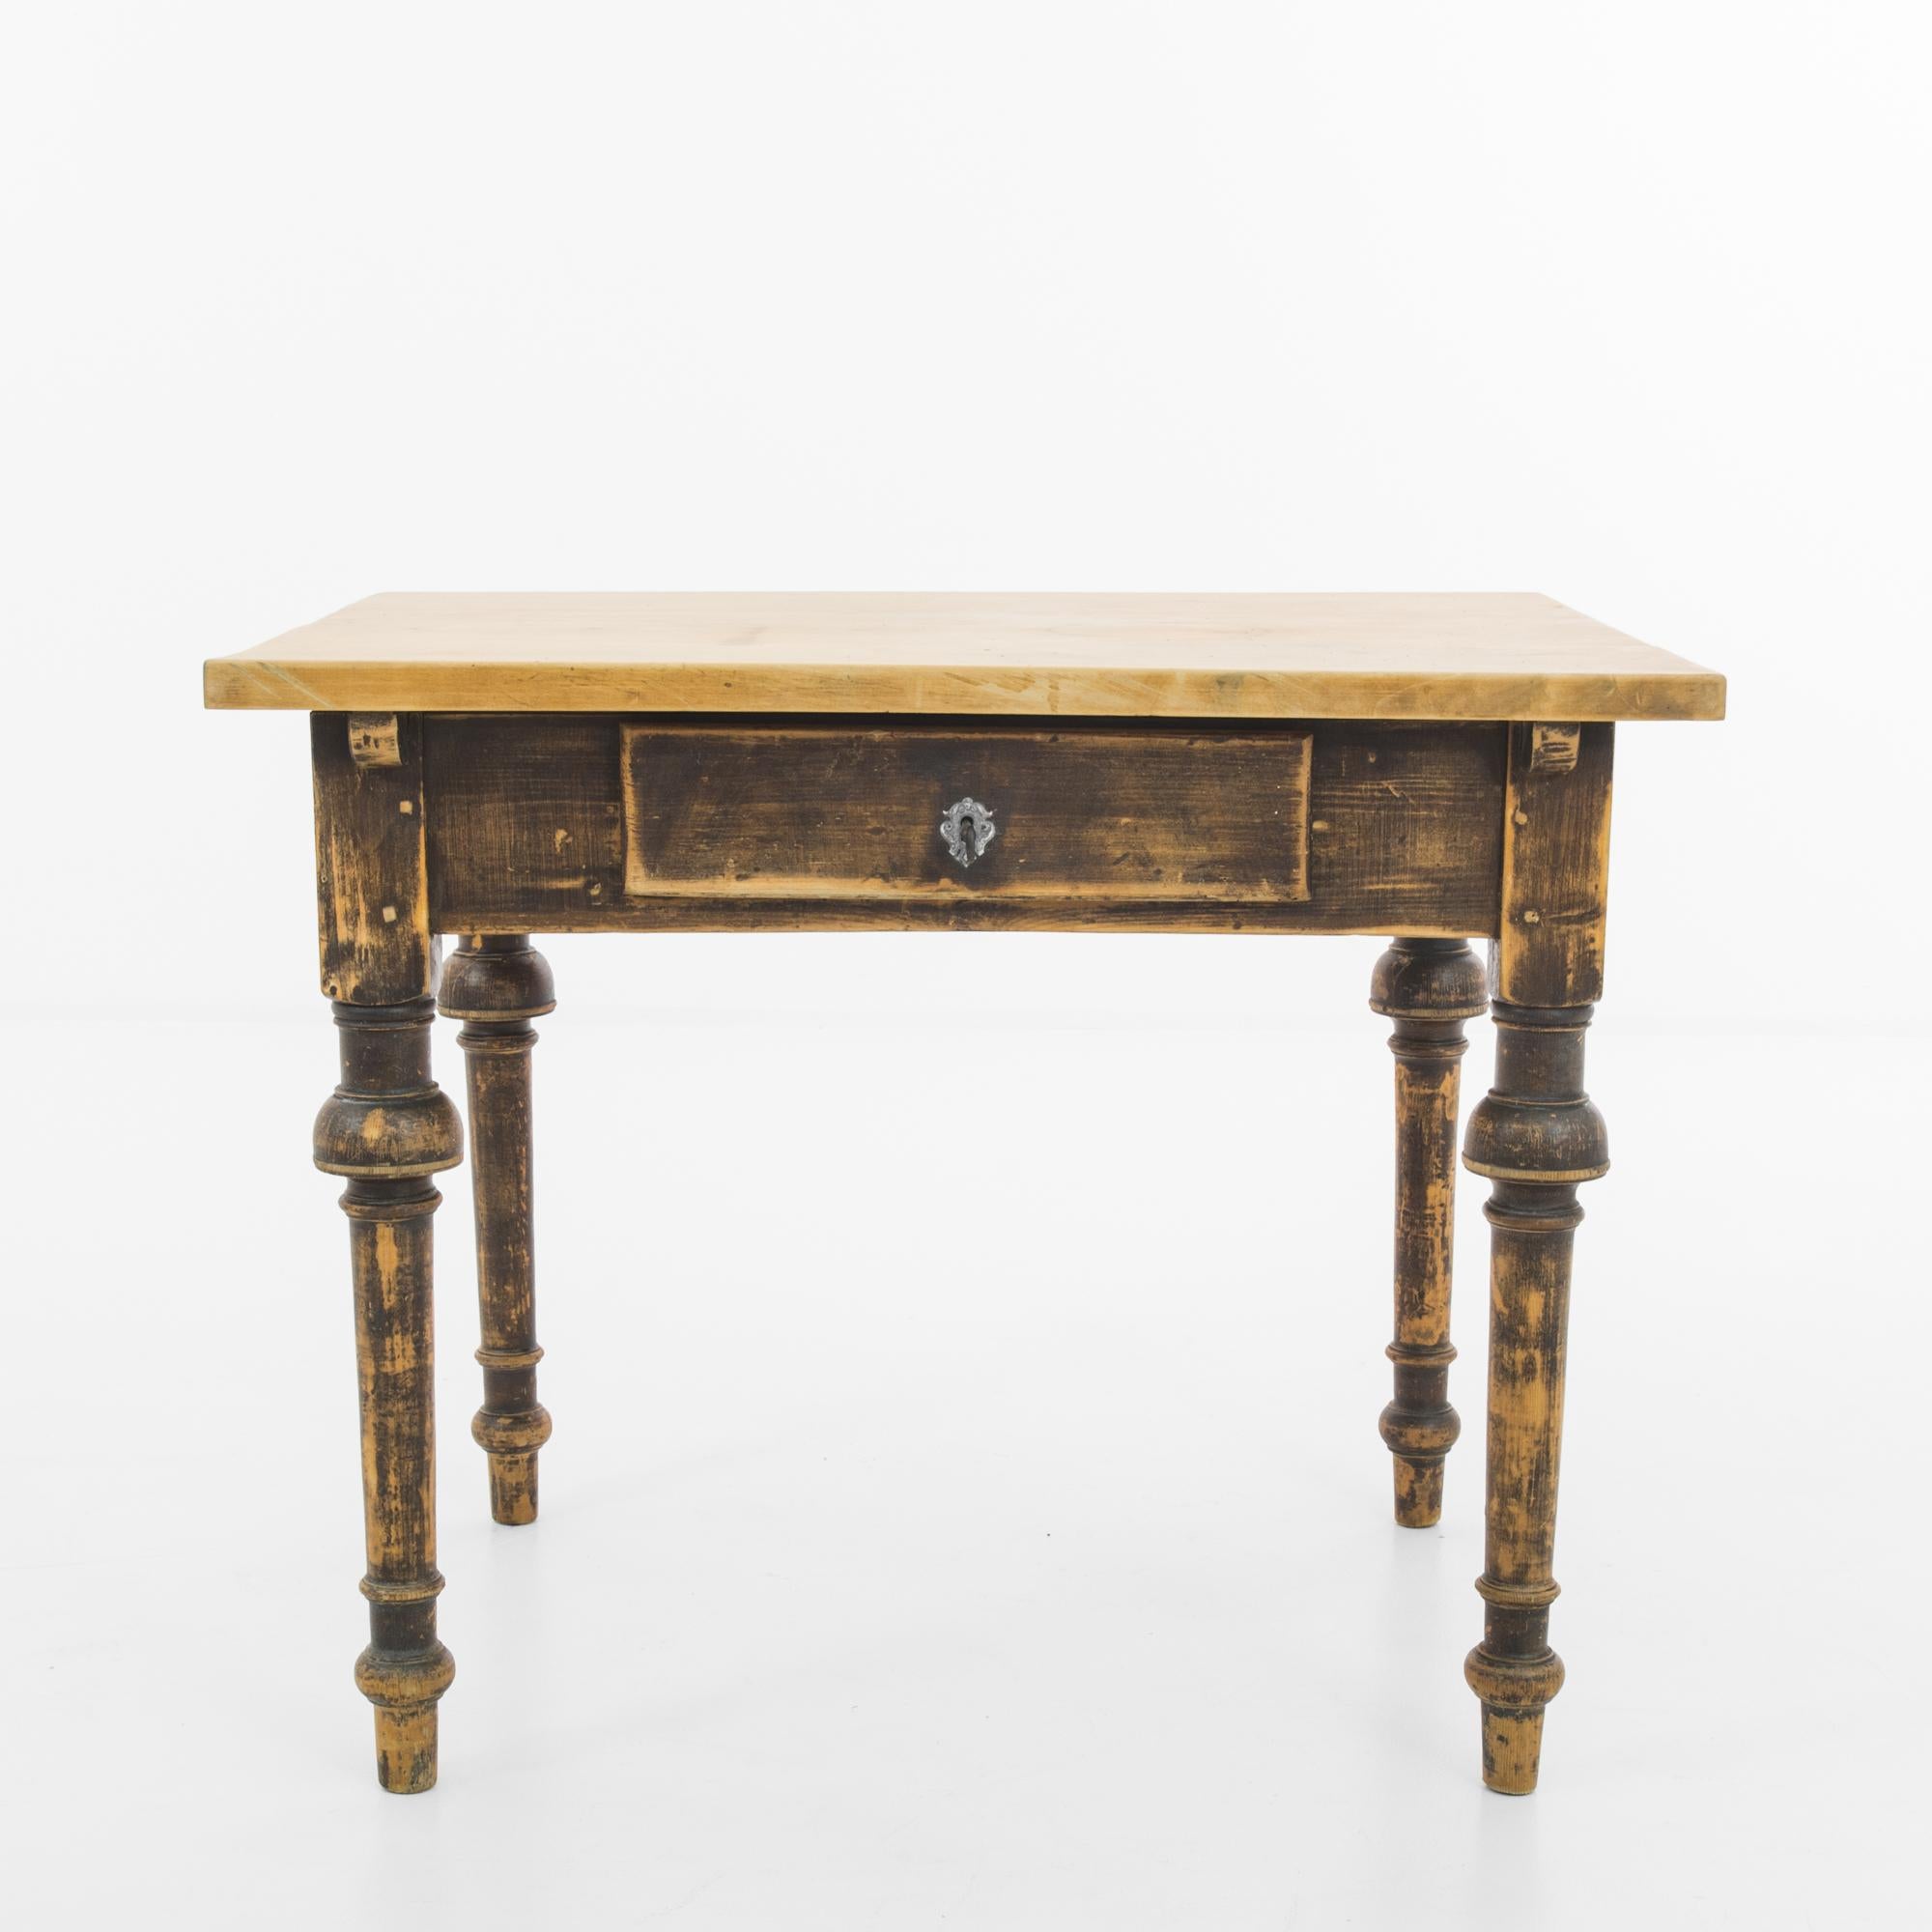 A wooden table from Scandinavia, produced circa 1900. A graceful side table featuring a sliding drawer with original lock and key. Looking like it sprang from a Hans Christen Andersen tale, this charming antique will add a touch of history and